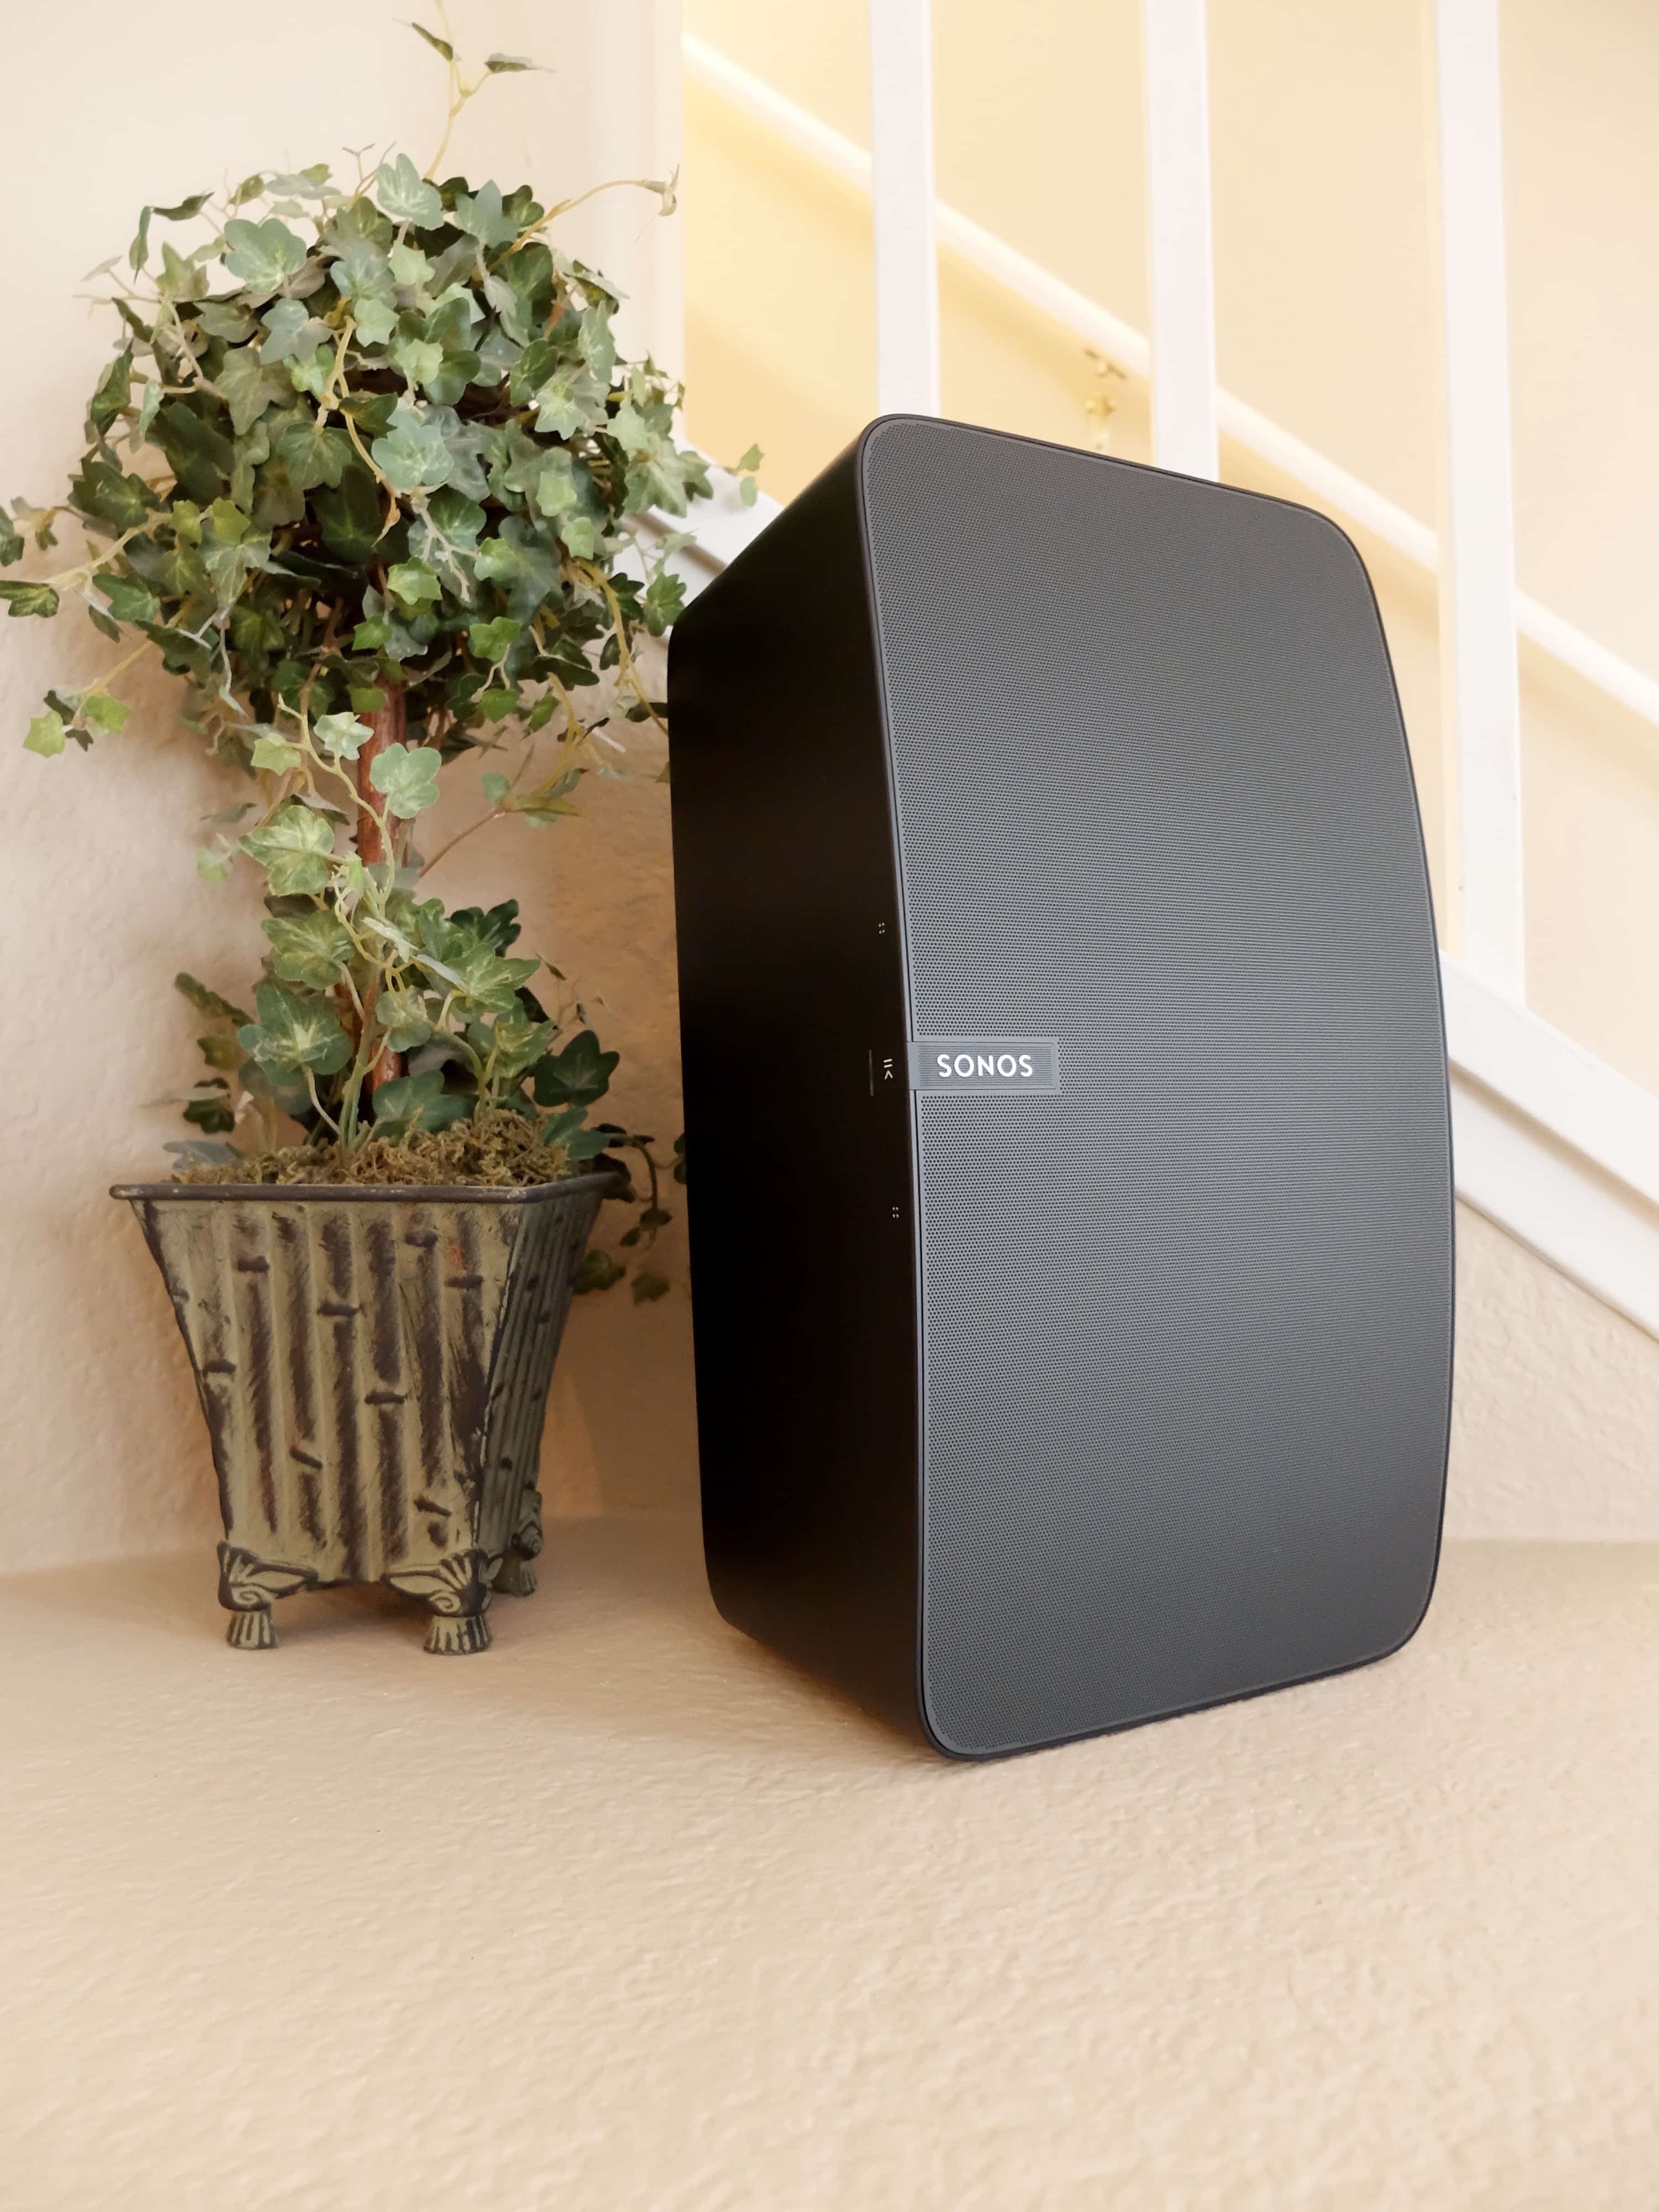 A Review of Sonos Play:5 — Tools and Toys